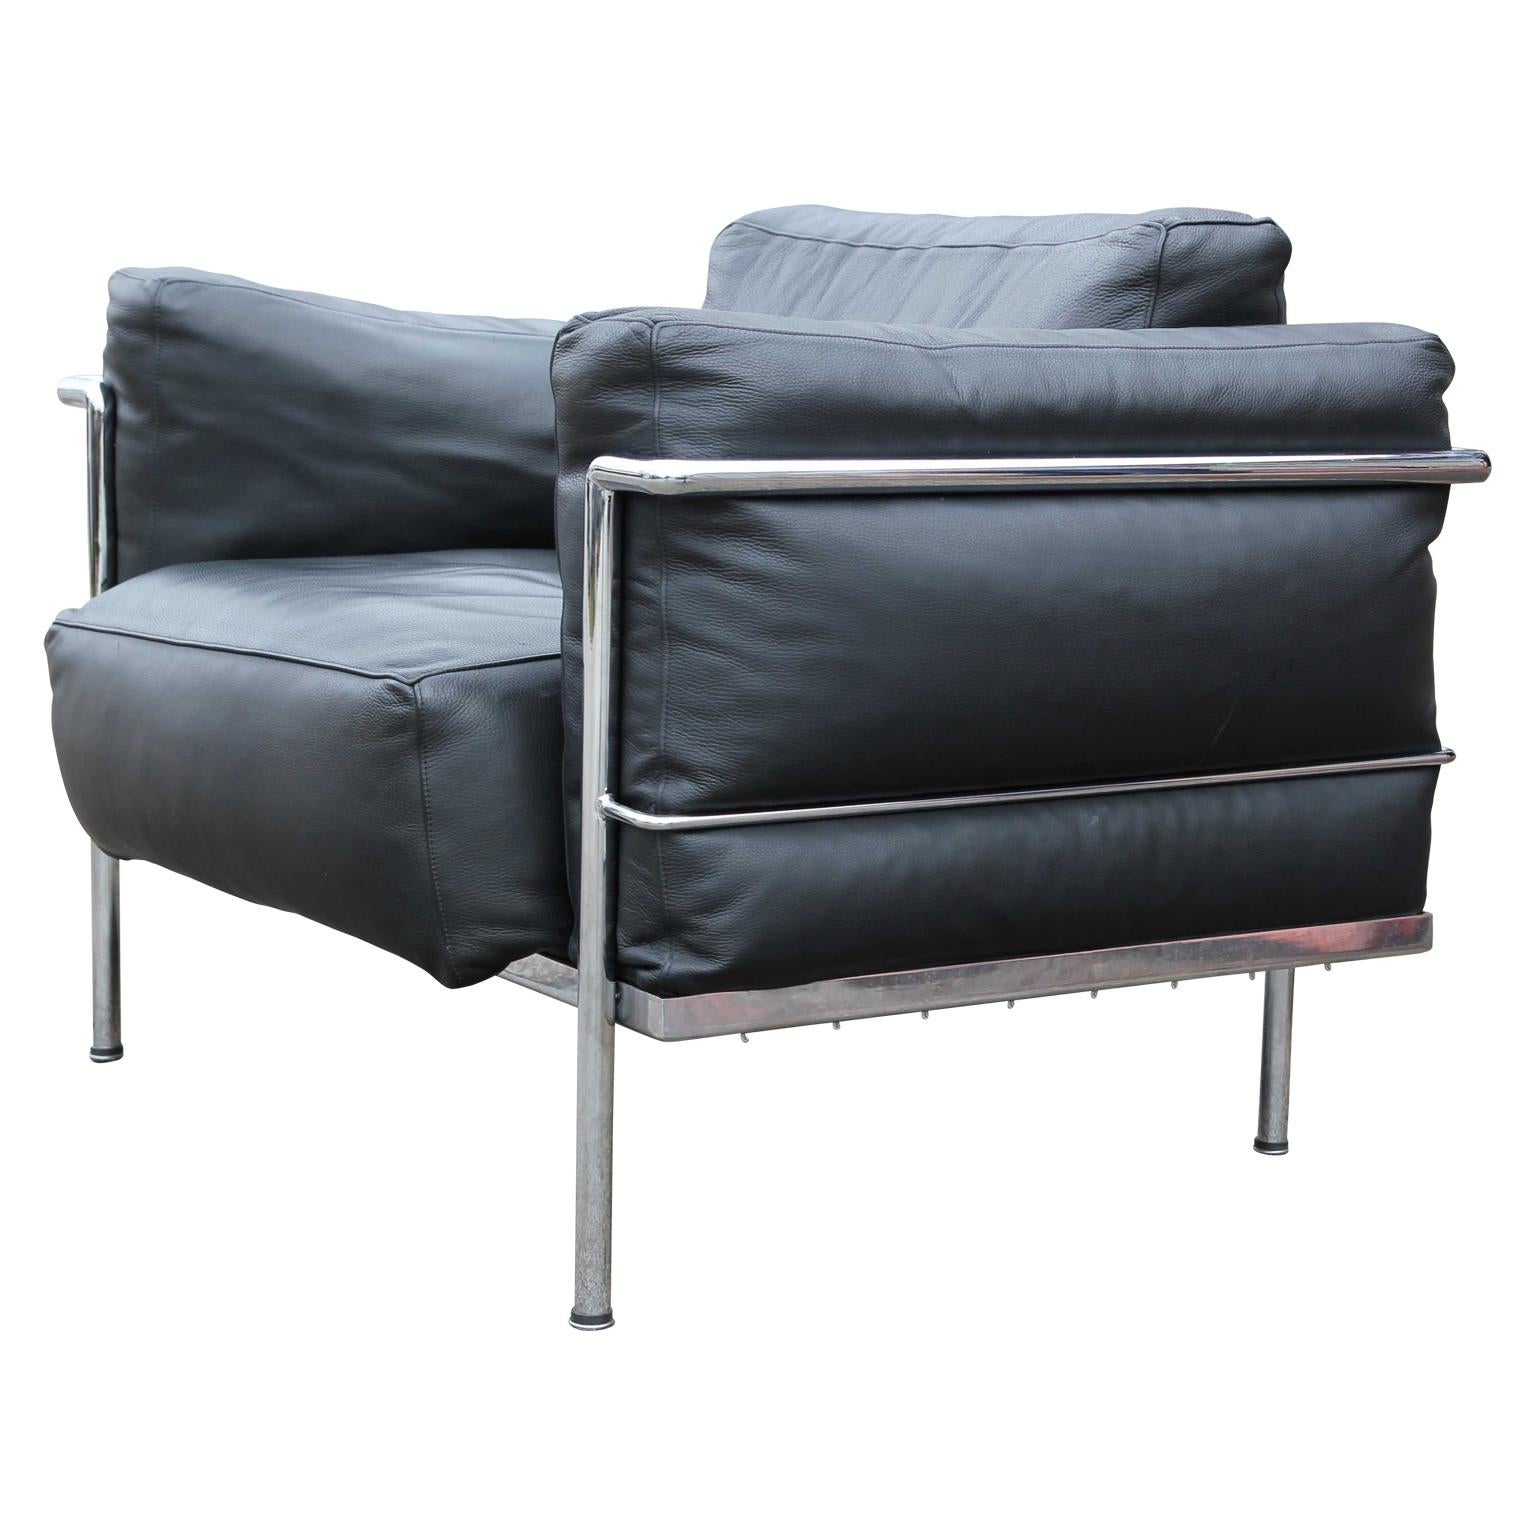 Unique LC3 Le Corbusier armchair with black leather cushions and silver framing. The Le Corbusier group referred to their LC3 collections as 